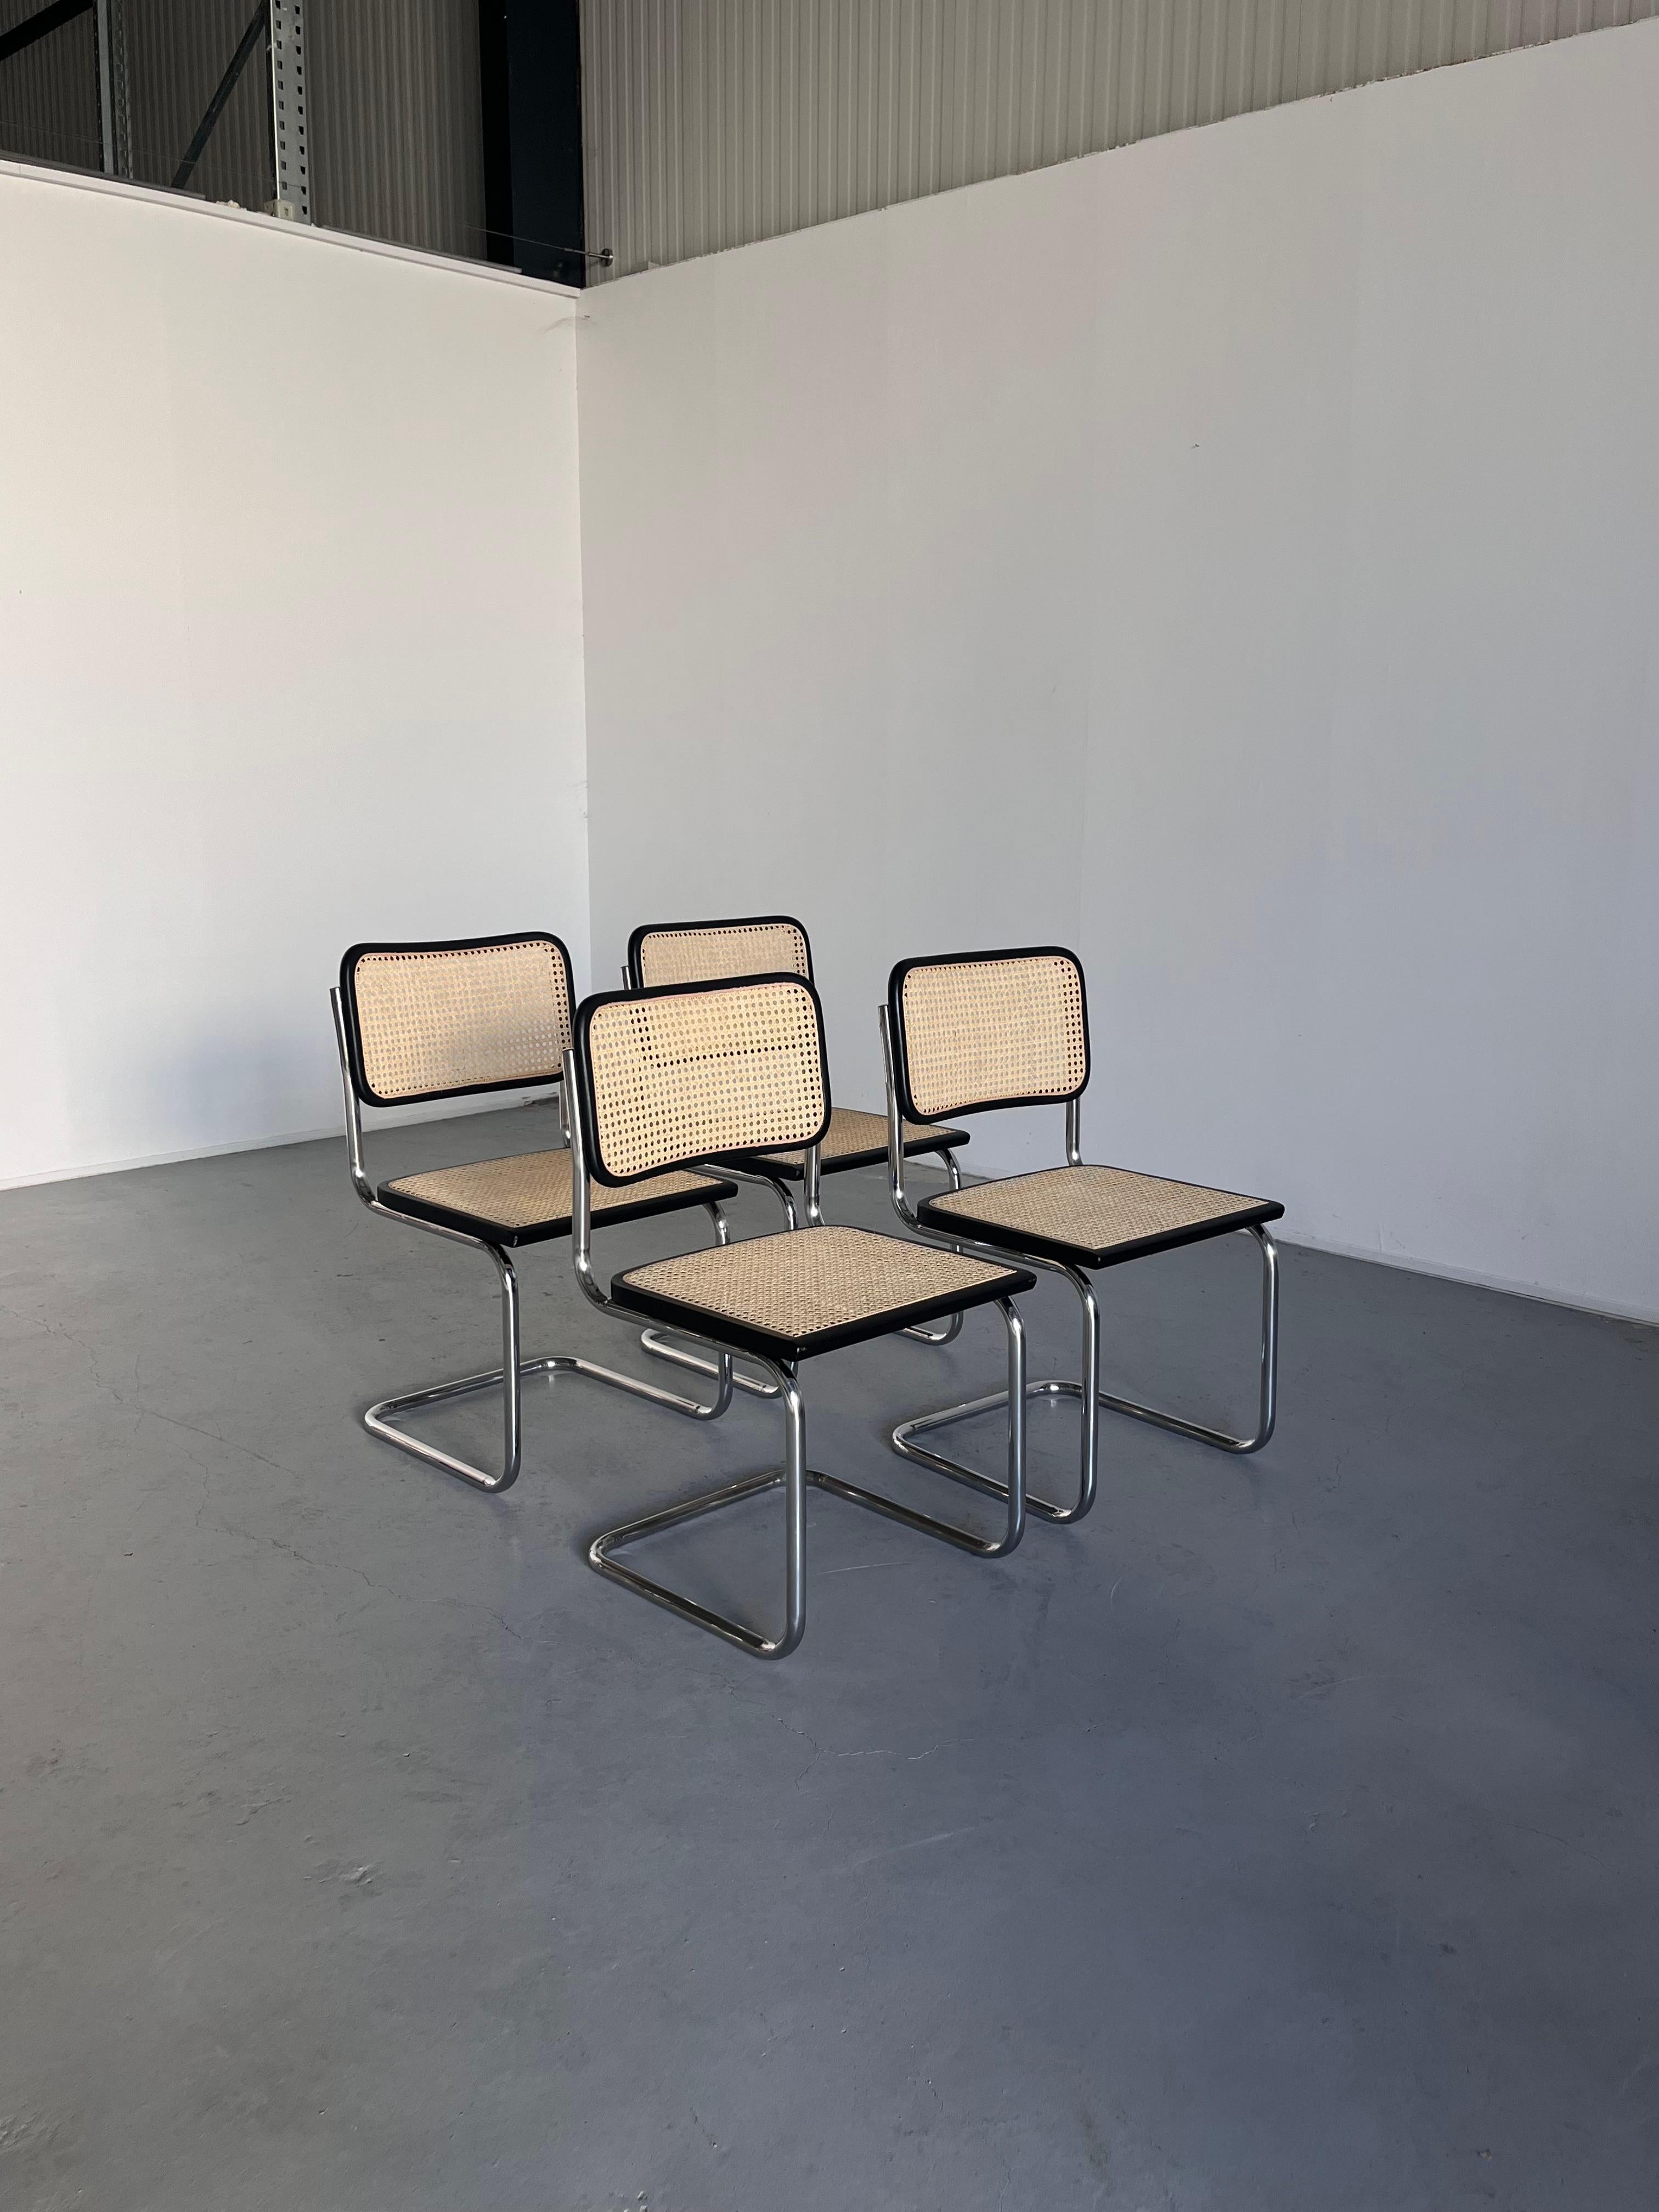 A set of four vintage Marcel Breuer design B32 cantilever chairs.
Italian production of the late 1980s / early 1990s.

In very good vintage condition with expected signs of age, mostly some surface scratches or smaller scuffs.
Chrome frames in good